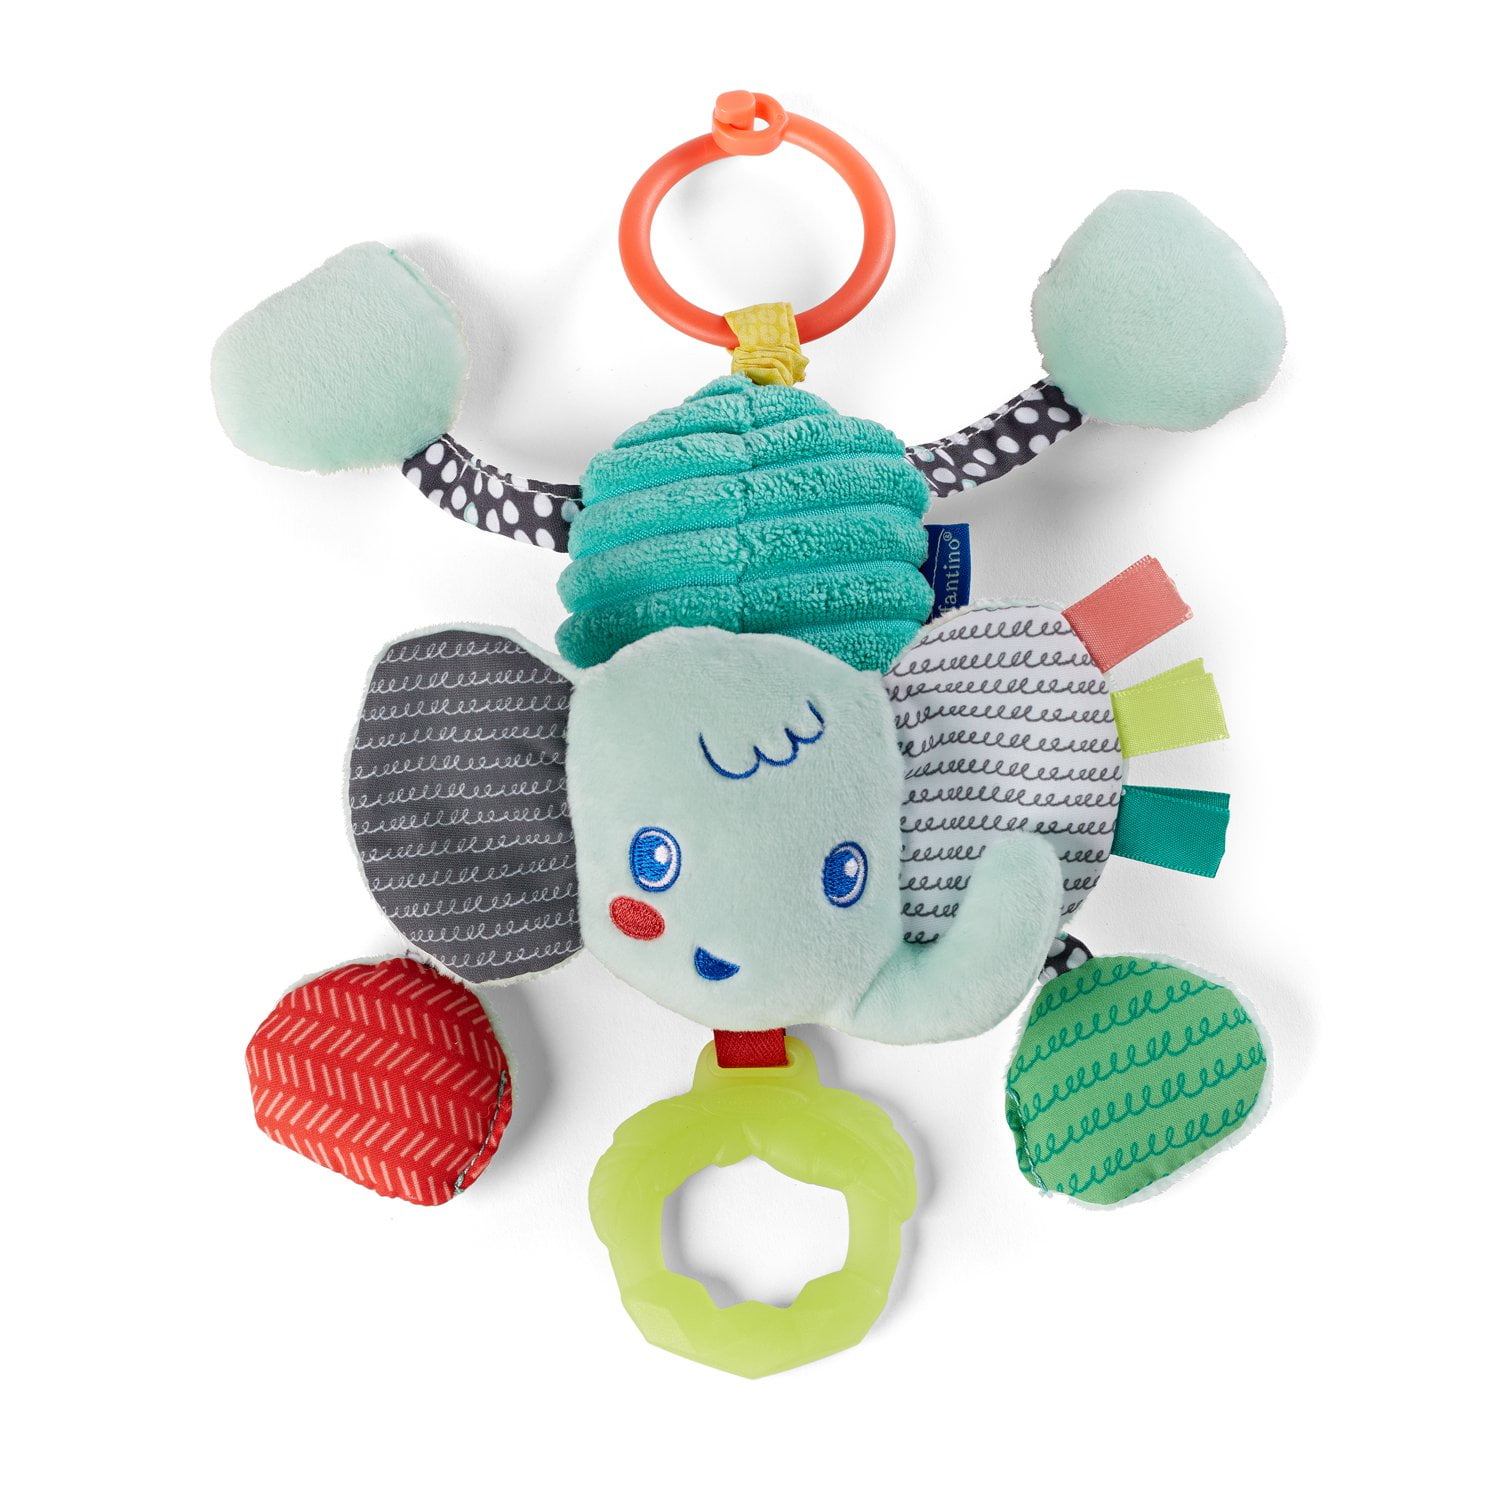 Infantino Pull & Play Jittery Pal Sensory Baby Toy 6-12 Months, Elephant